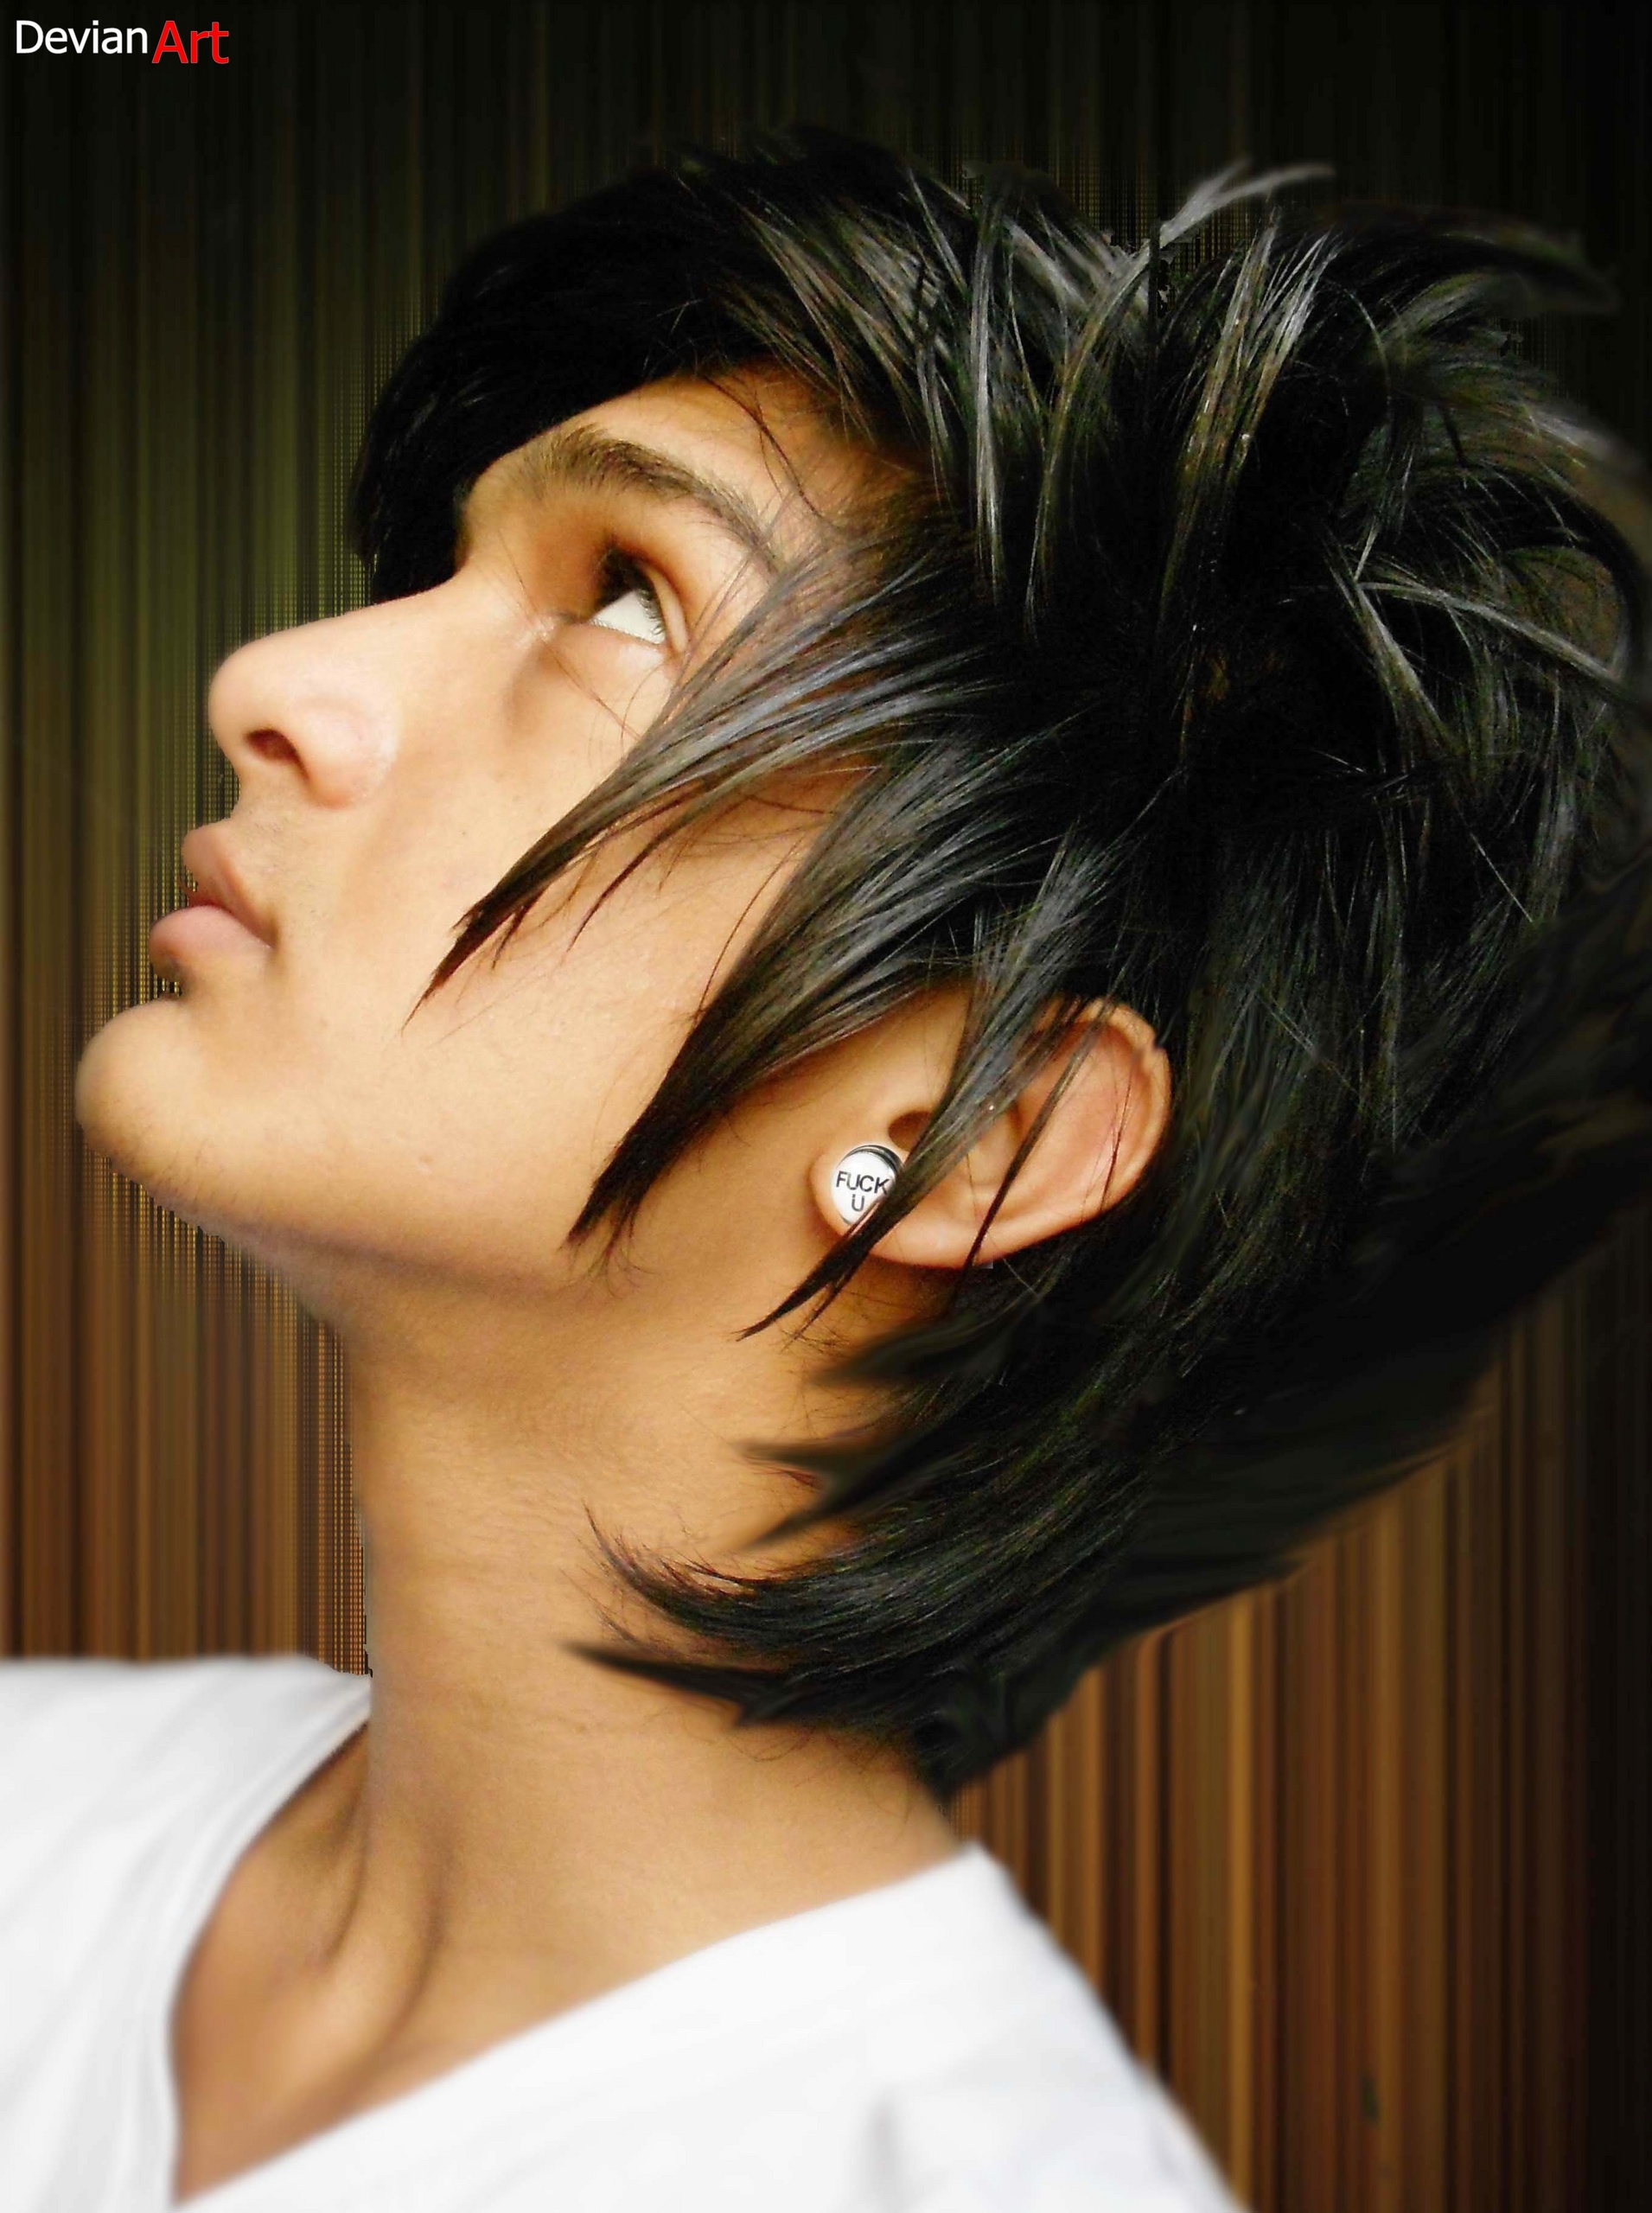 hairstyle for boys- new haircut - Emo Photo (36399093) - Fanpop